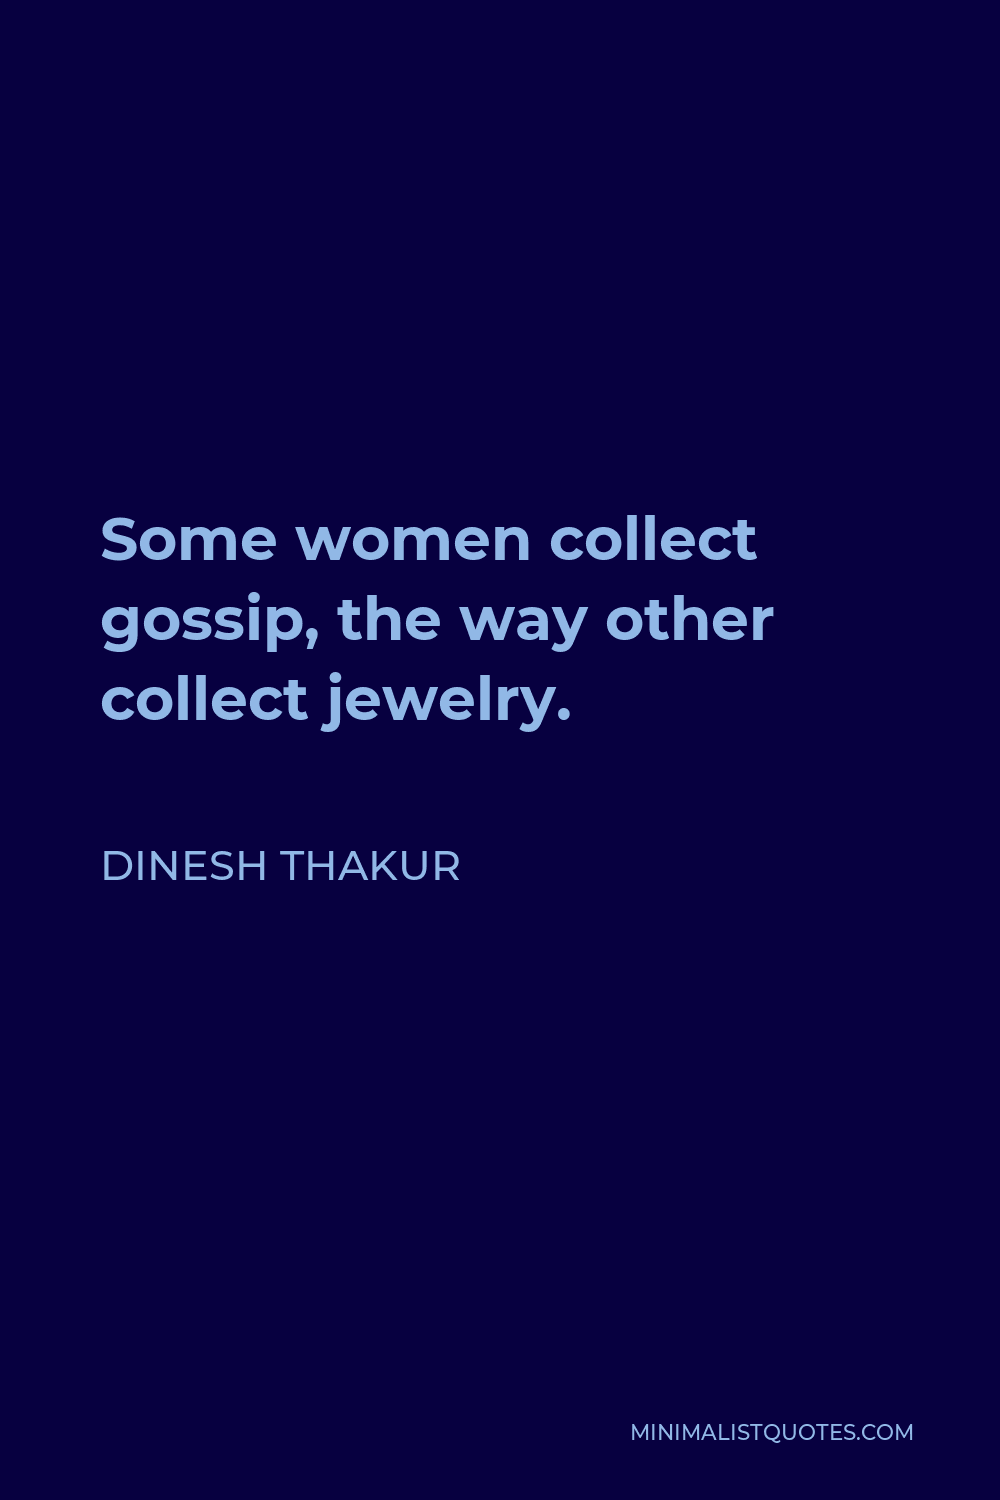 Dinesh Thakur Quote - Some women collect gossip, the way other collect jewelry.